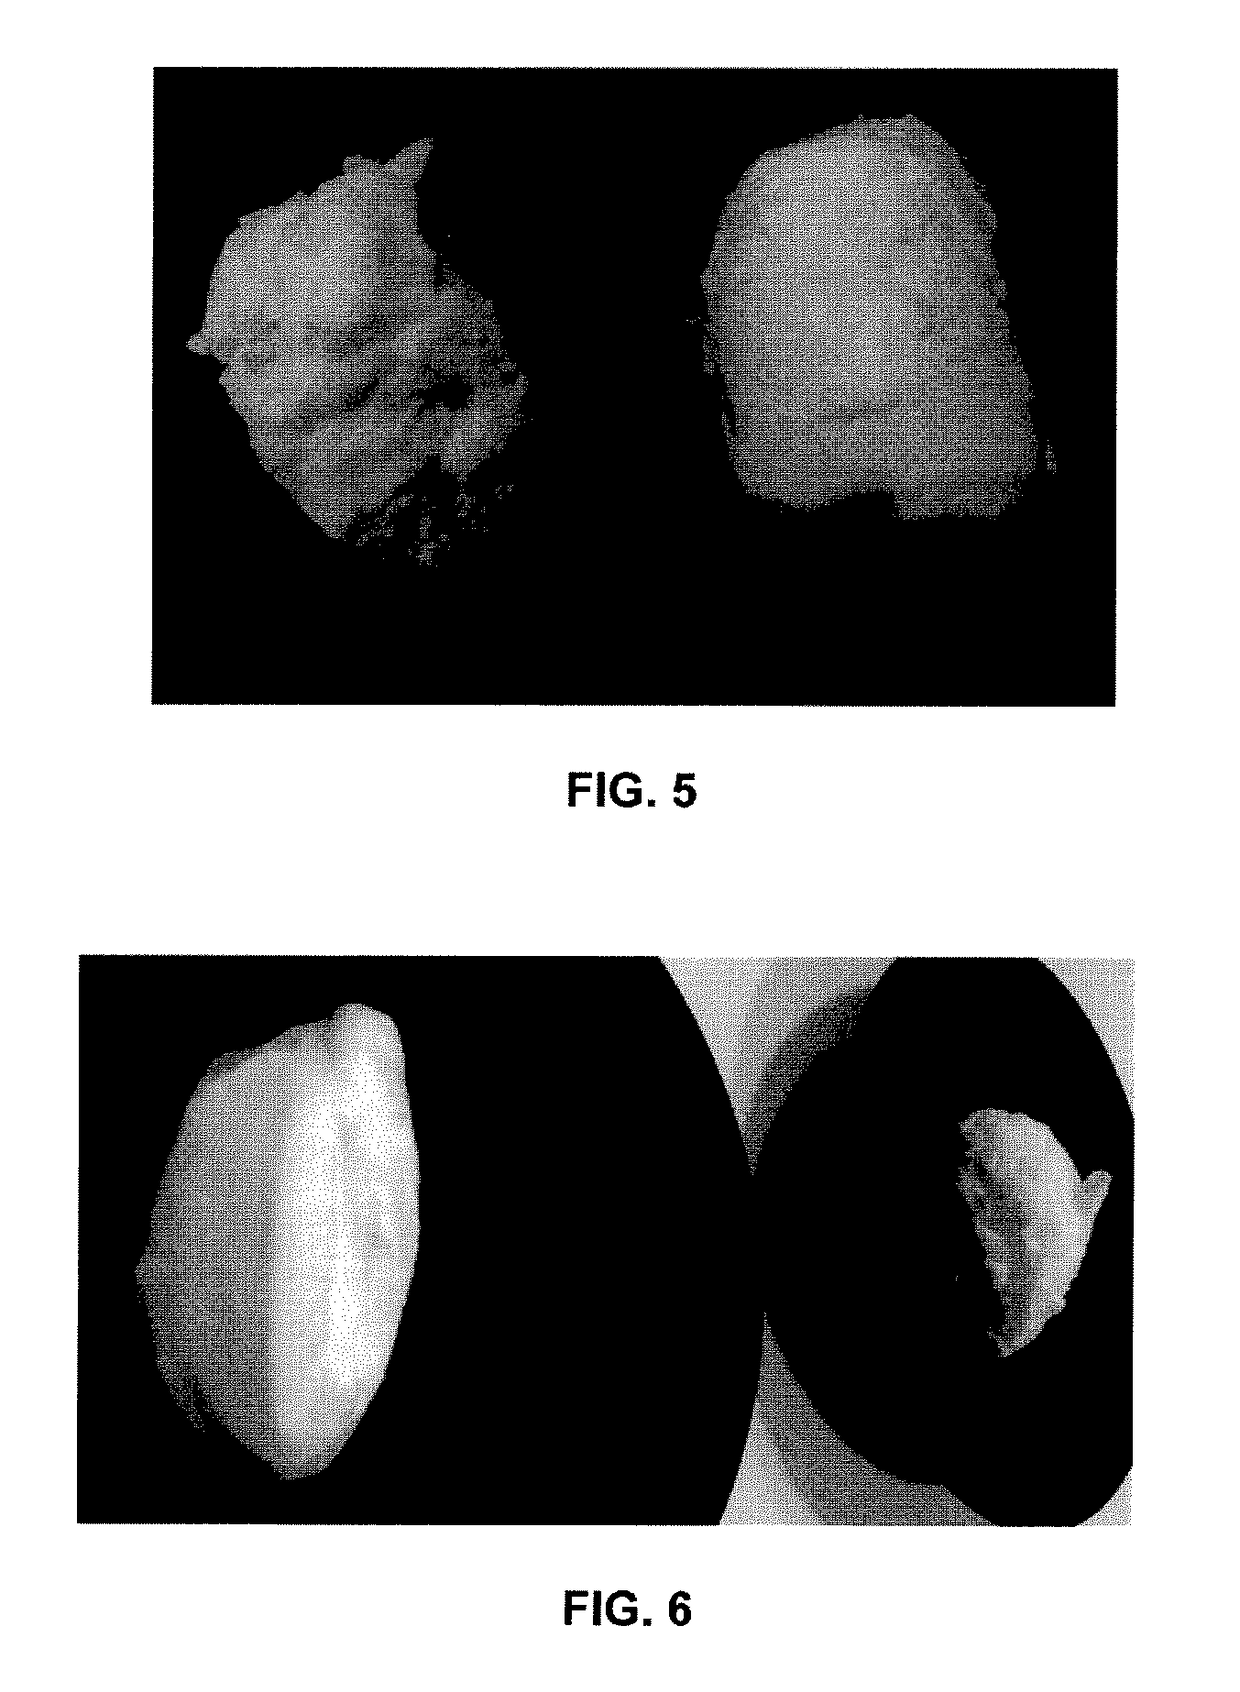 Healthy food compositions having gel or foam textures and comprising hydrolyzed egg products